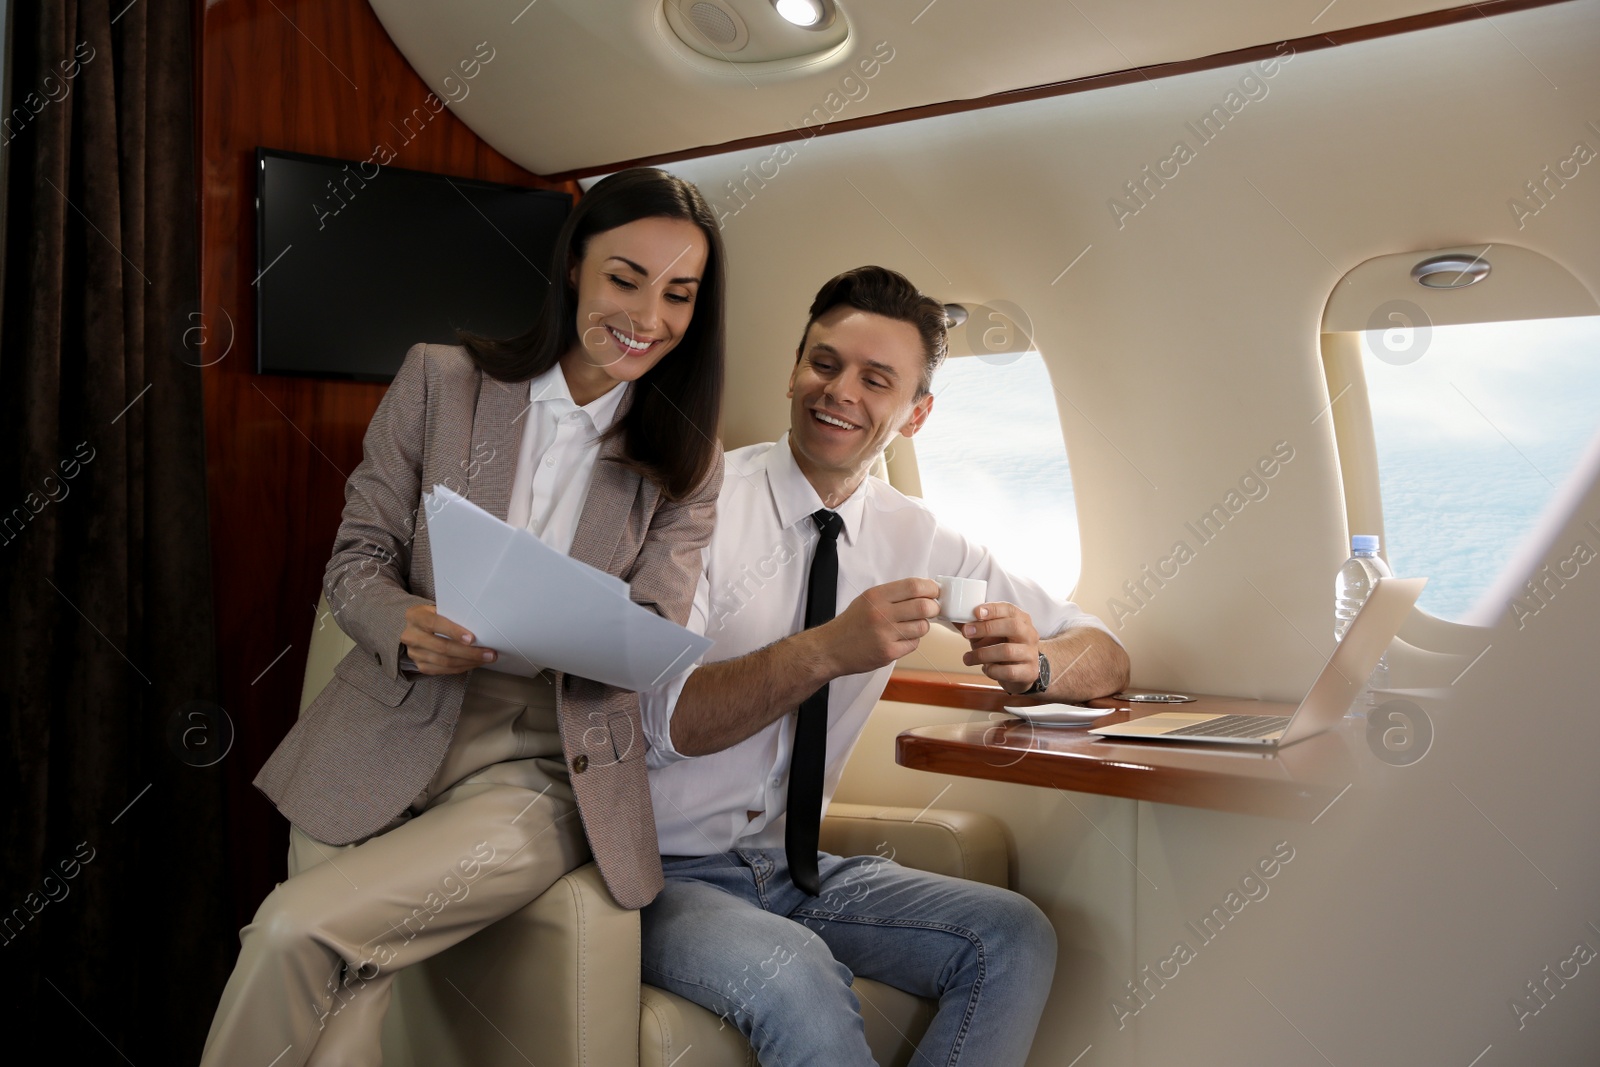 Photo of Colleagues working together in airplane during flight